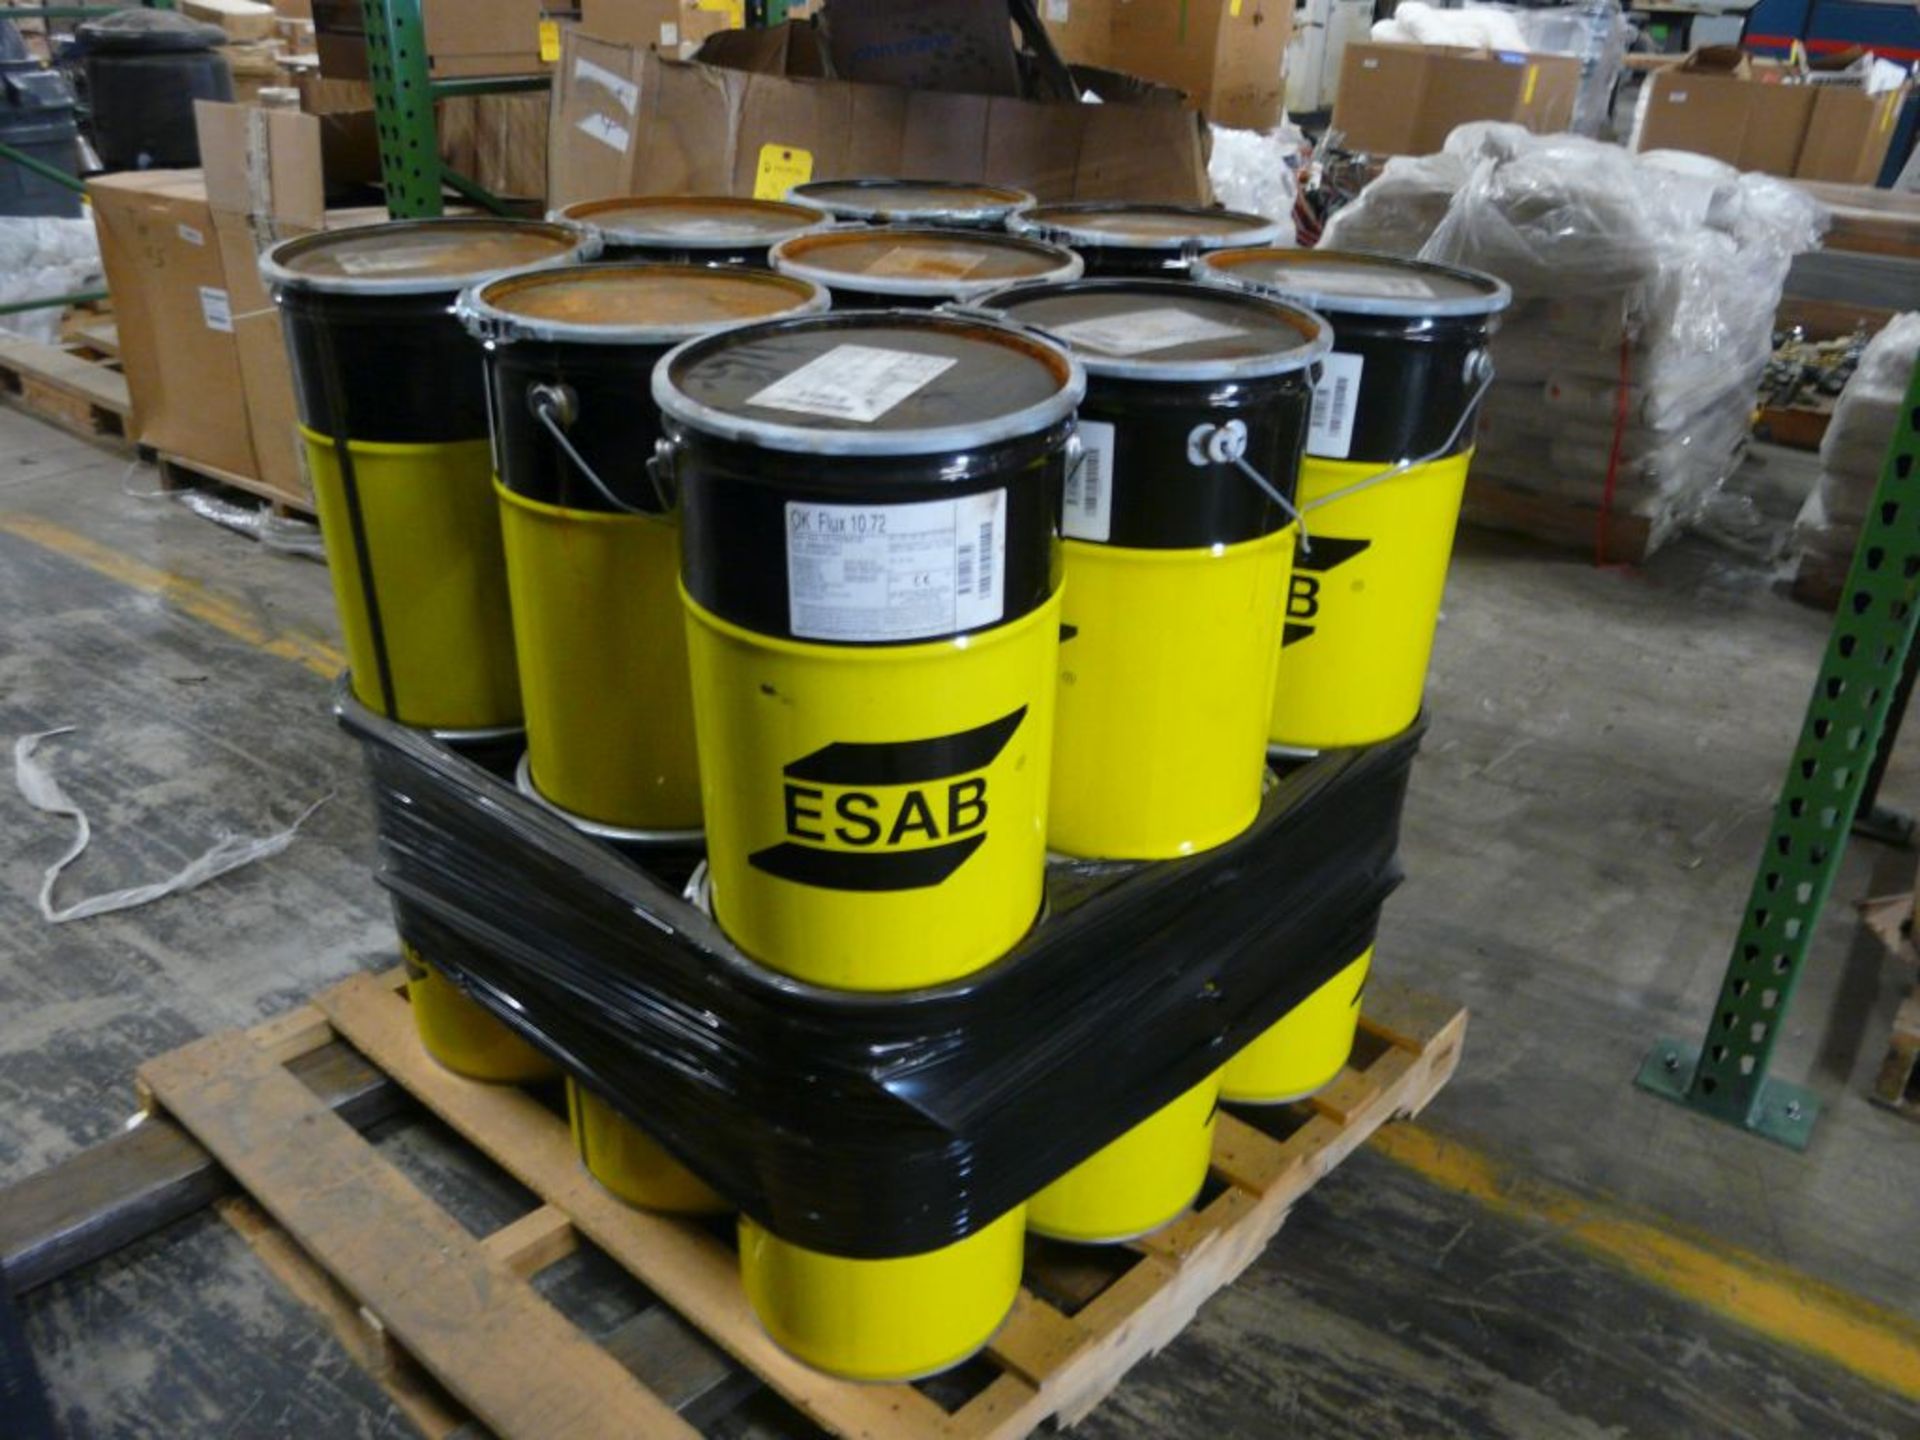 Lot of (63) Drums of ESAB Flux 10.72 - Part No. 1072000CBI; 55 lbs Each; Tag: 214961 - Image 2 of 4